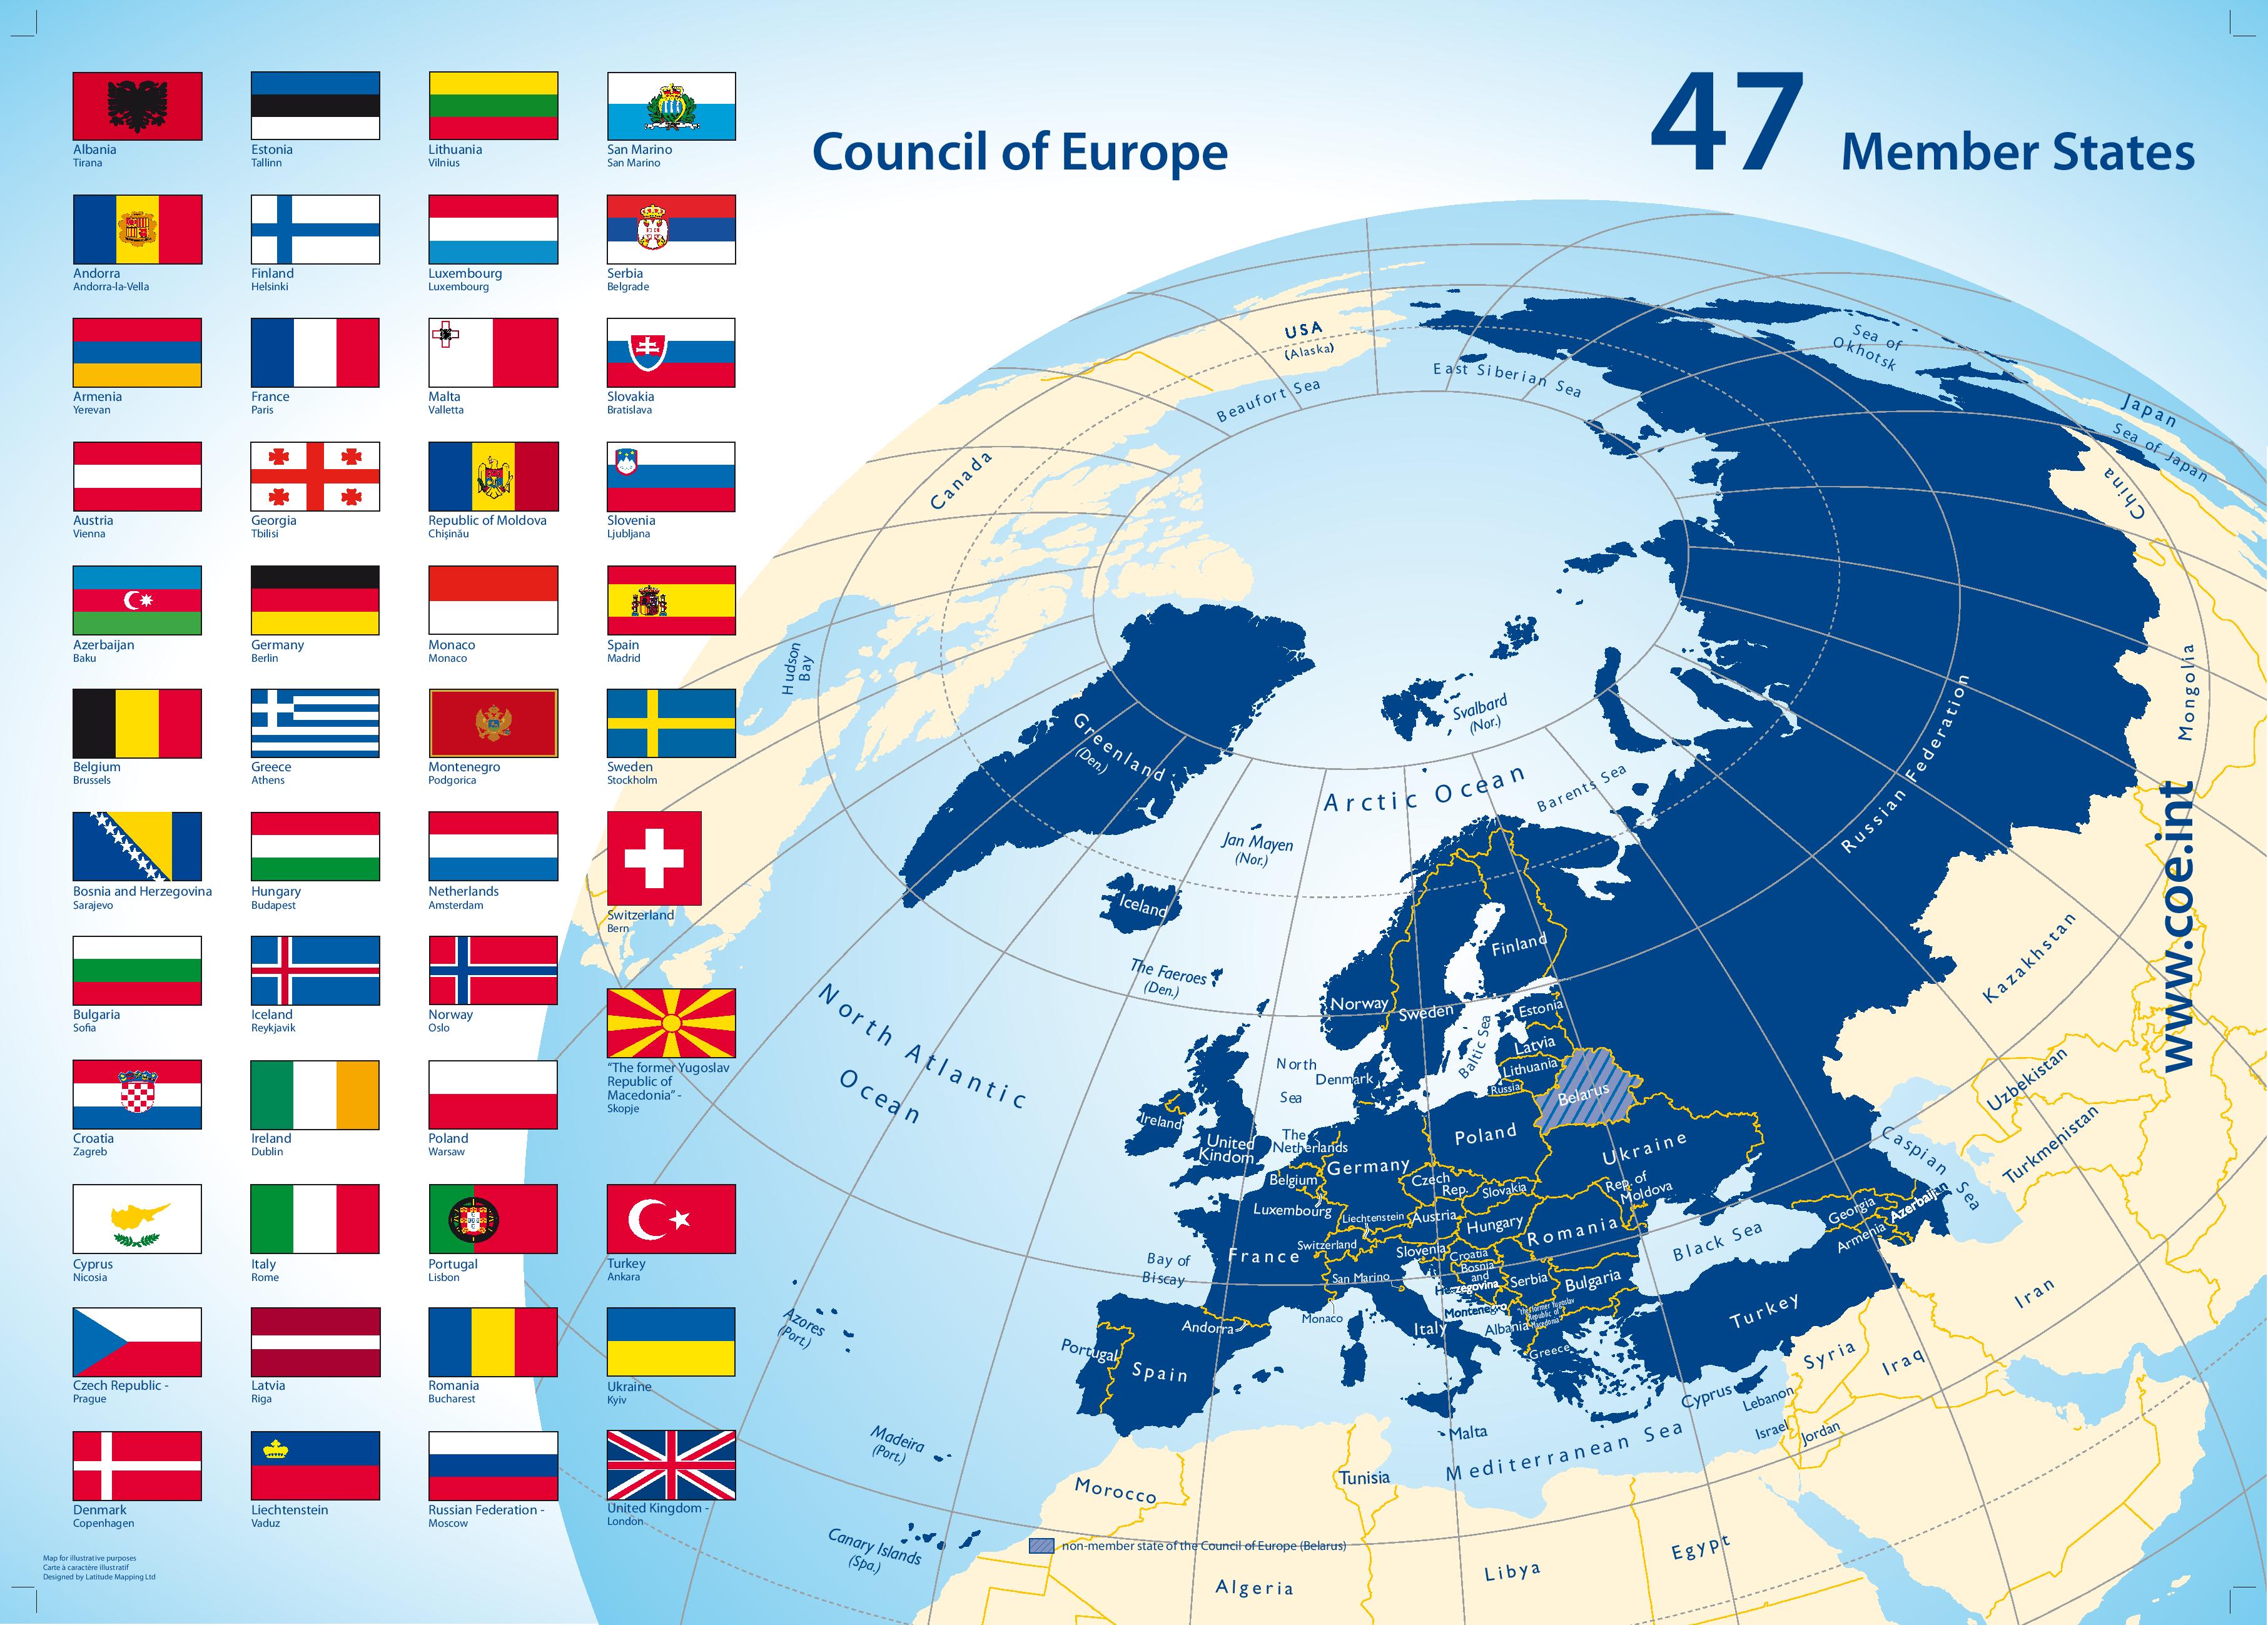 Map of the 47 Member States of the Council of Europe